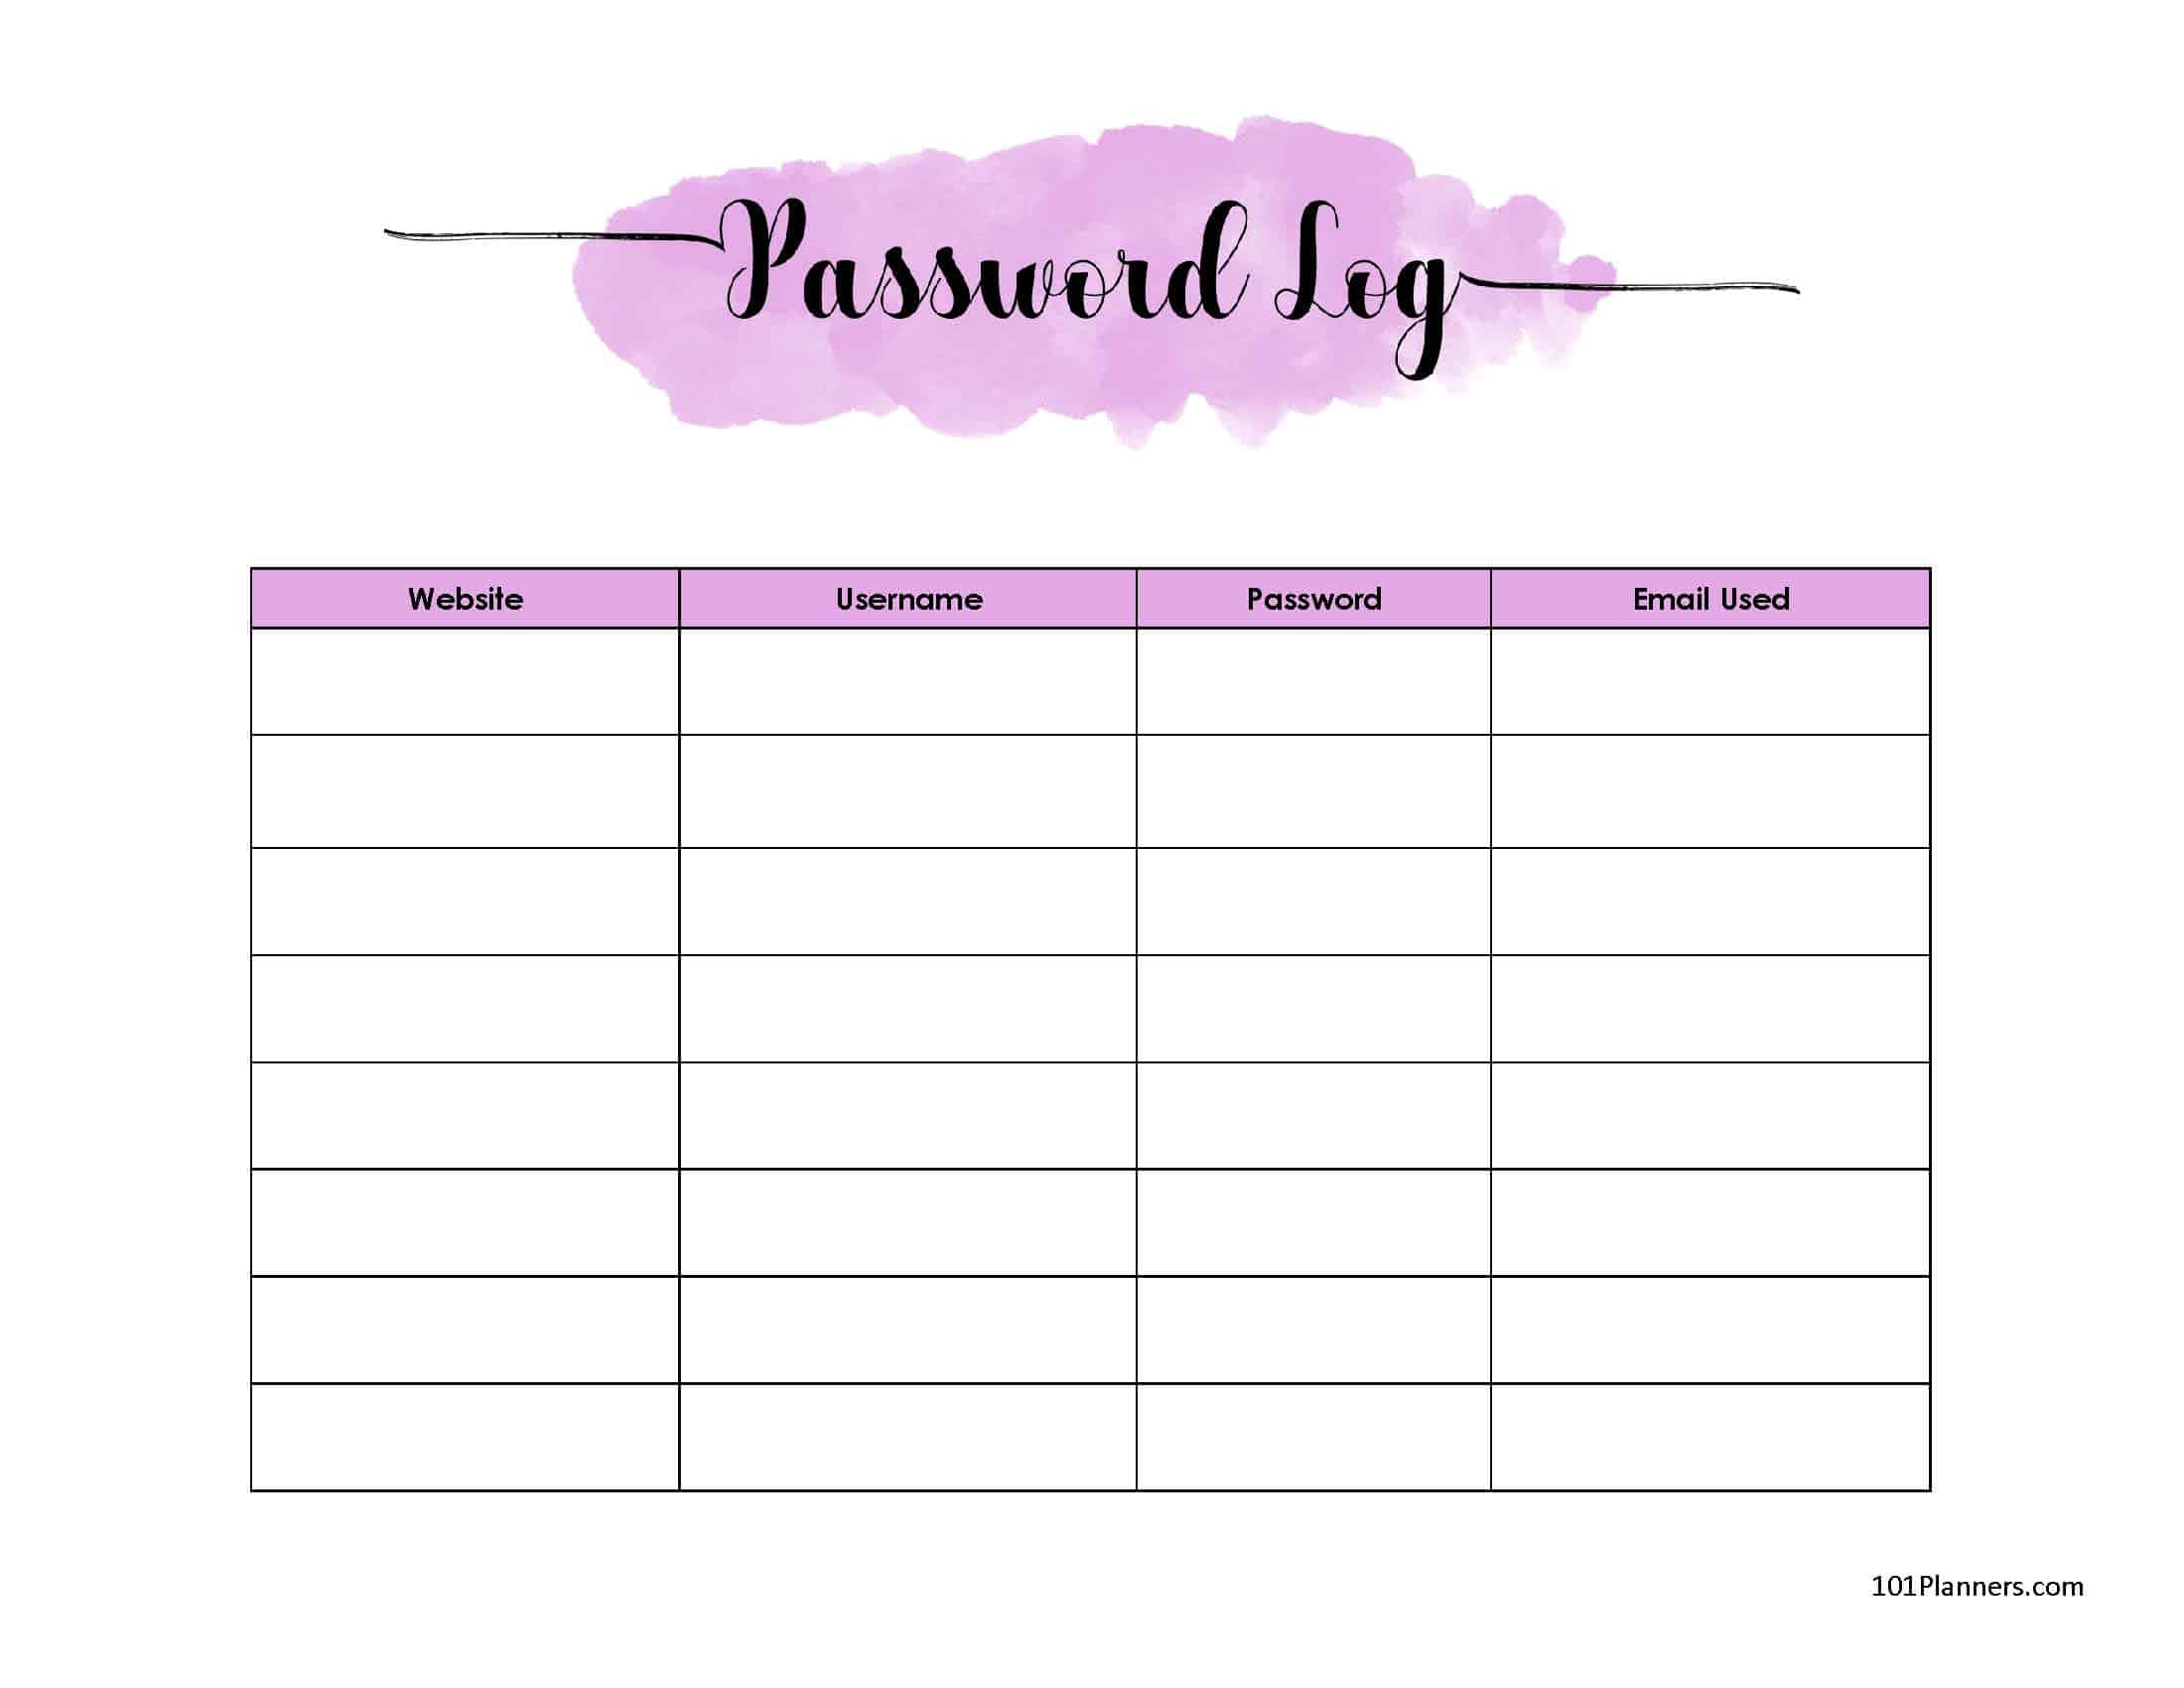 FREE Customizable Password Log | Many Templates are Available